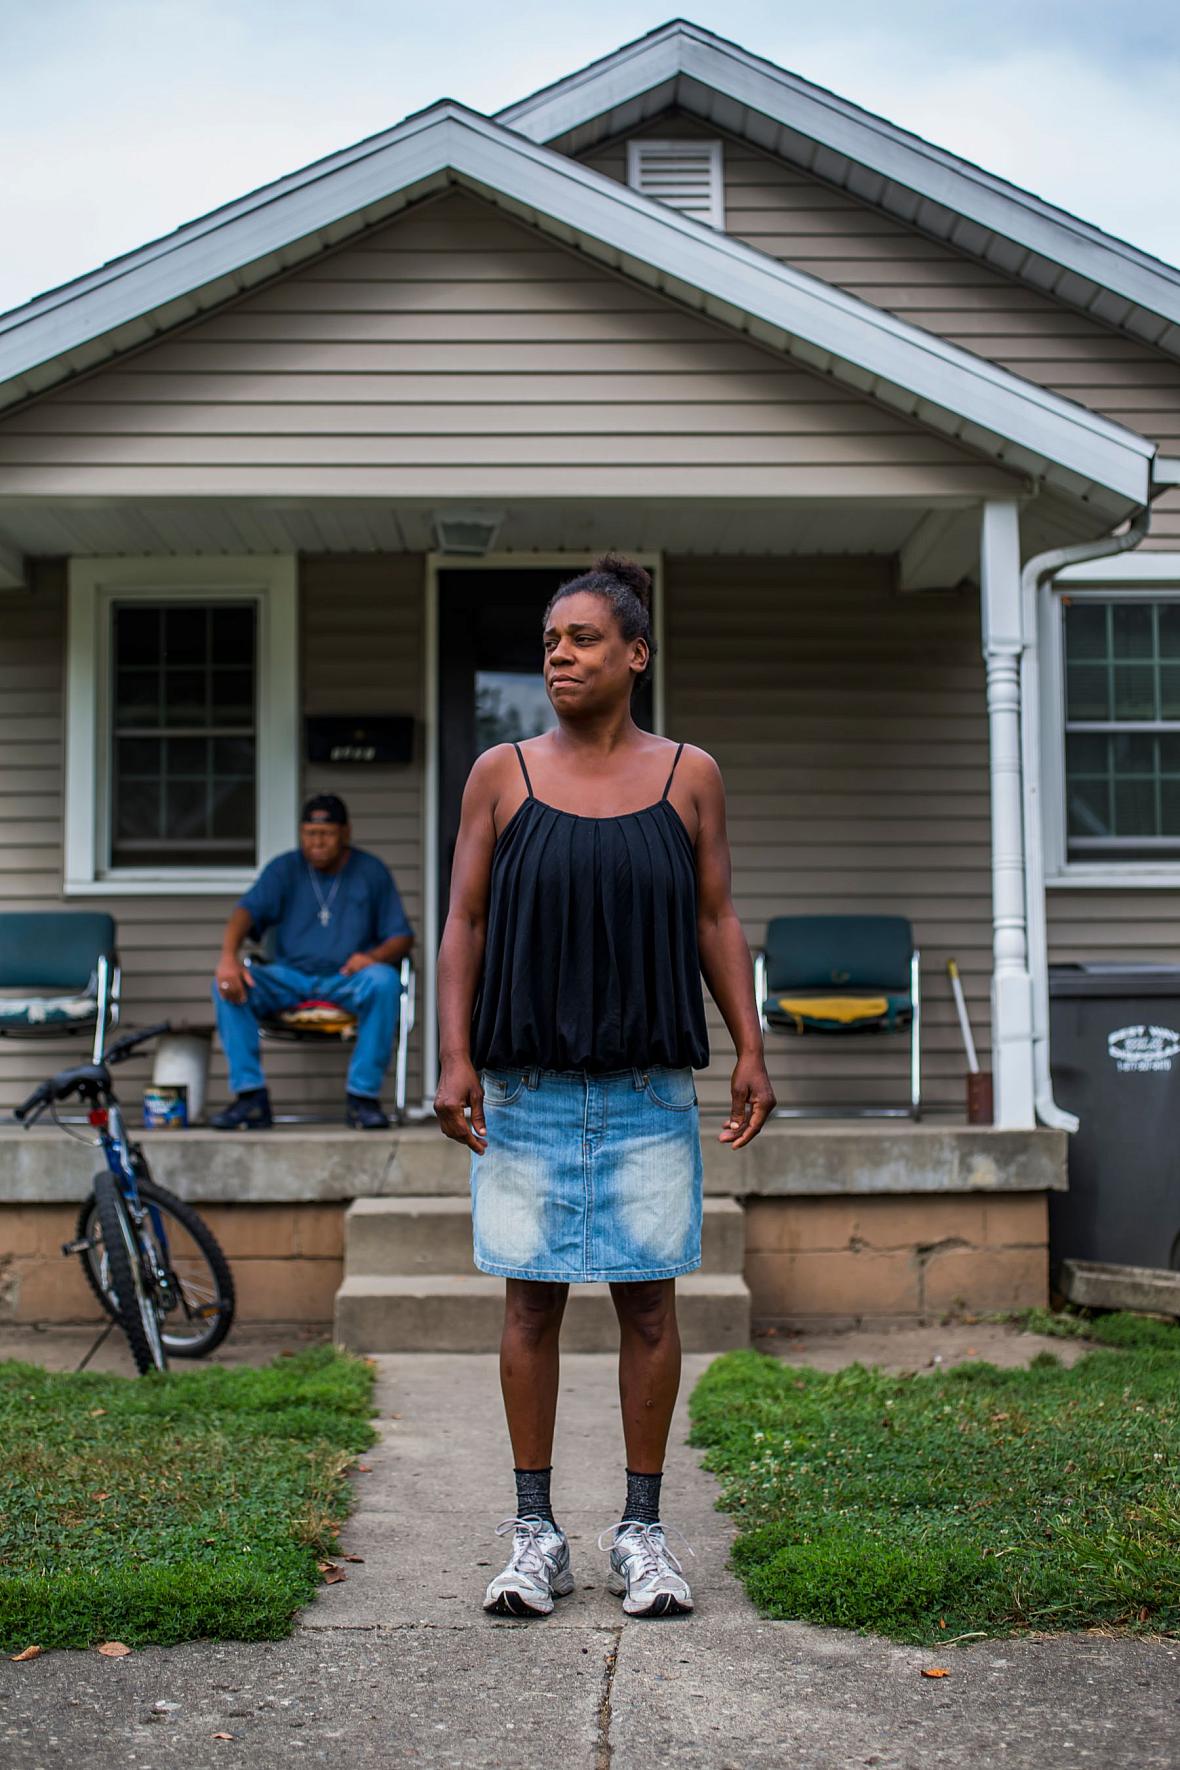 Ashley's biological mother Kim Guiden stands in front of her home in Anderson, Indiana, in 2017.